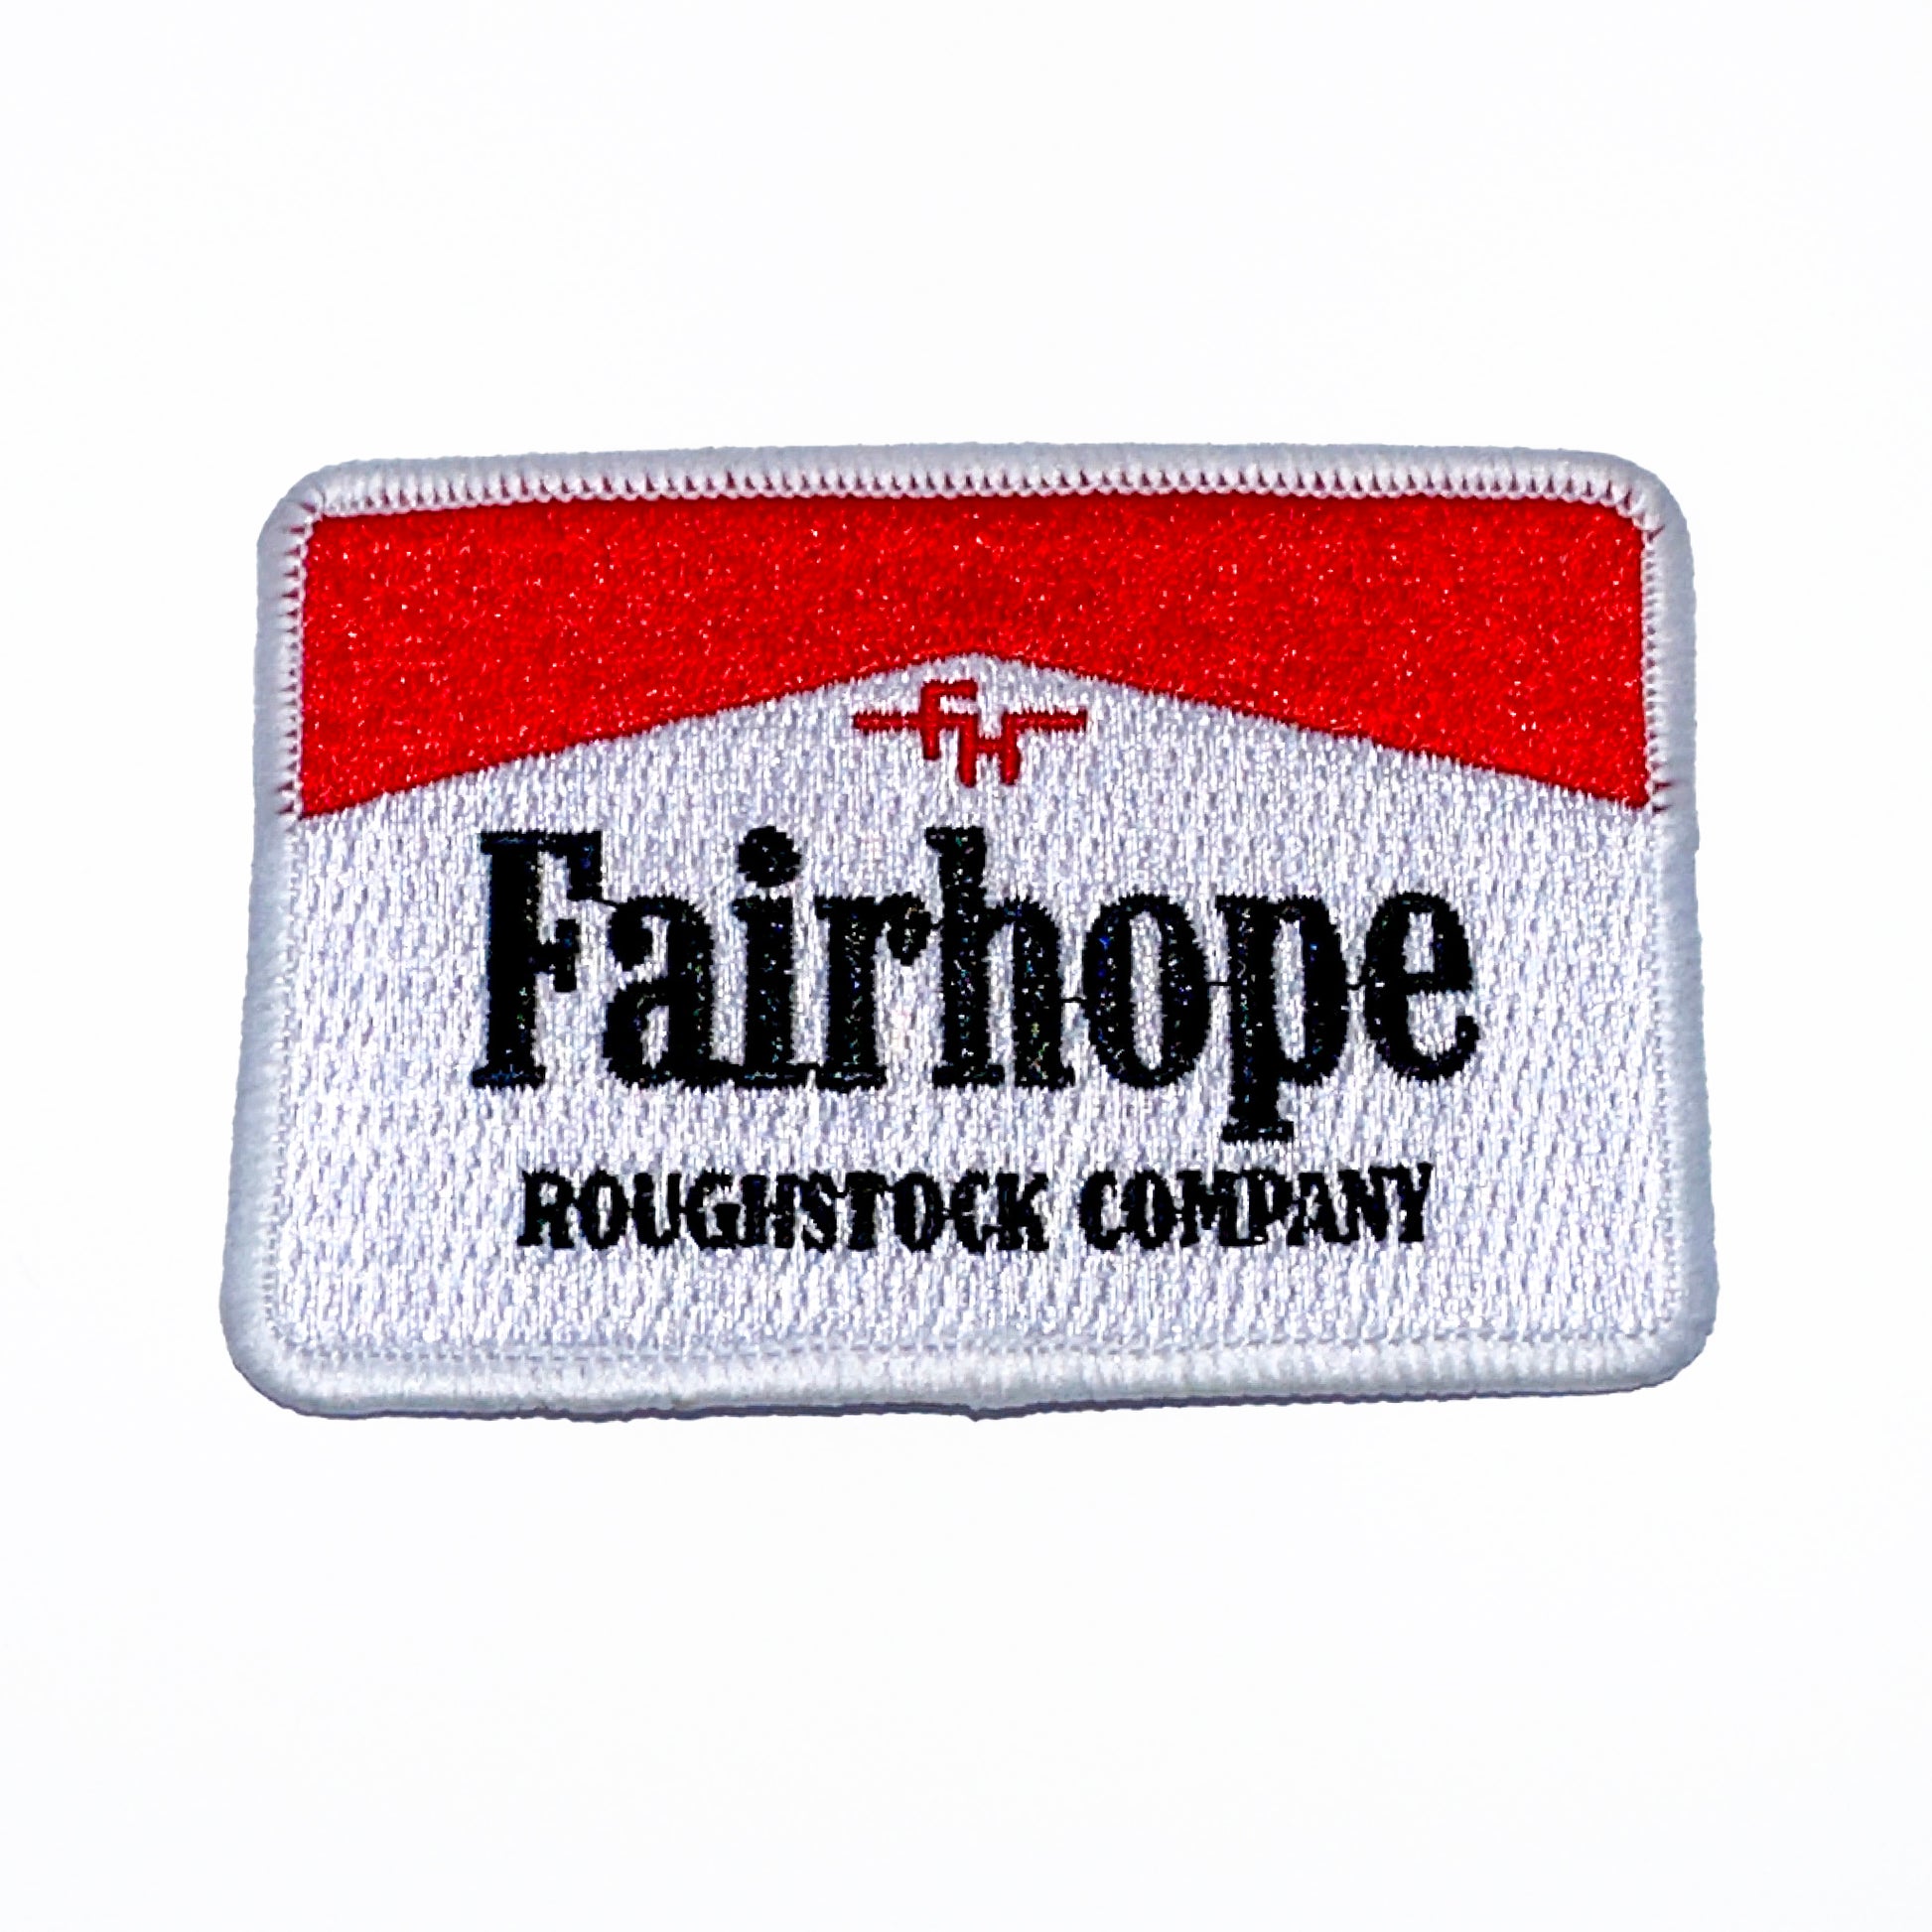 “The Cowboy Killer" Patch - White, Black, Or Red Edges - Fairhope Roughstock Company